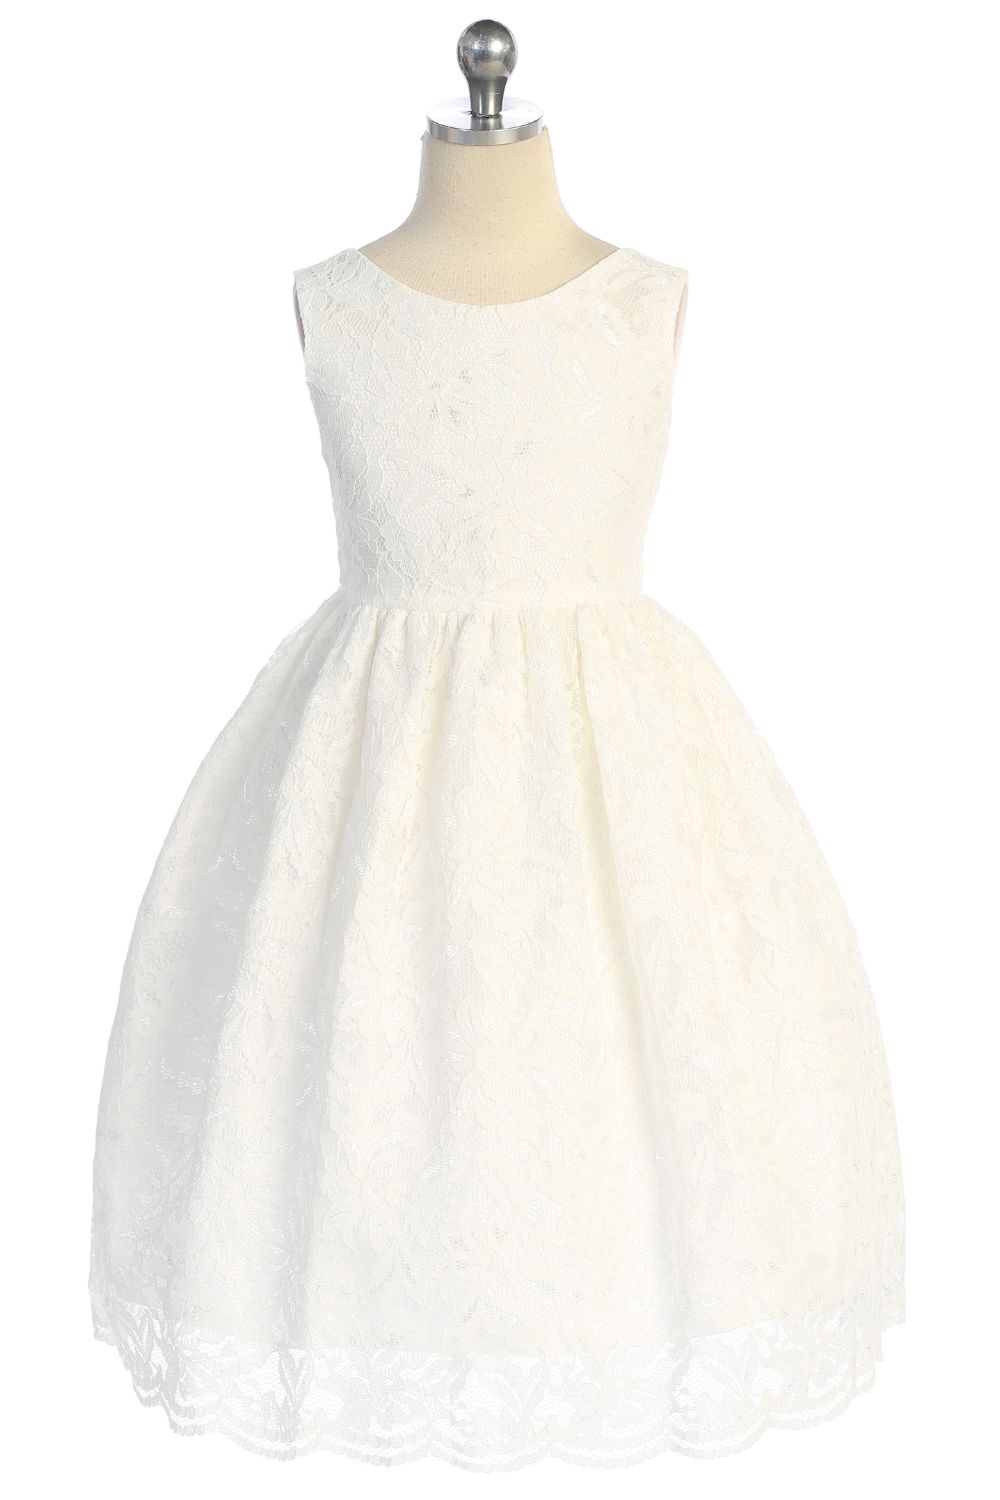 Lace V Back Bow Girl Party Dress by AS526 Kids Dream - Girl Formal Dresses